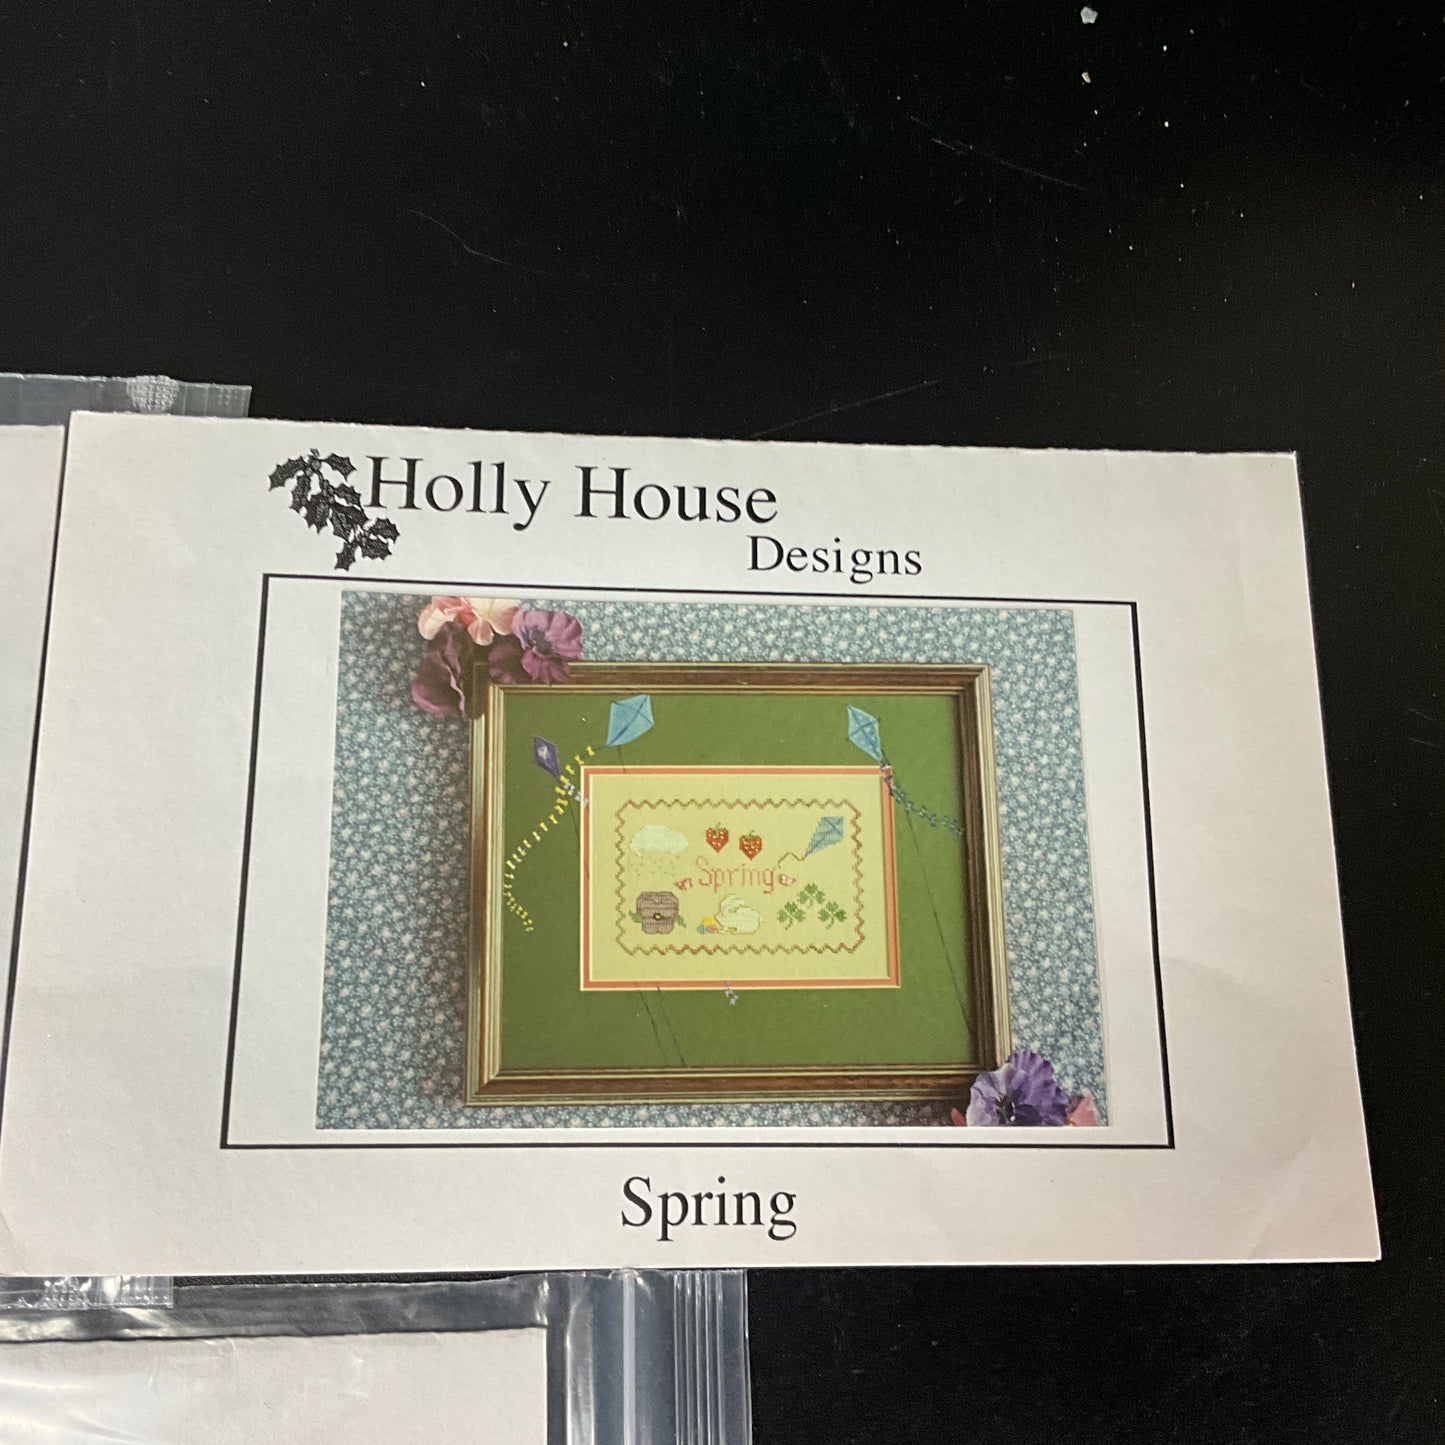 Holly House Designs choice Winter Spring or Autumn see pictures and variations*